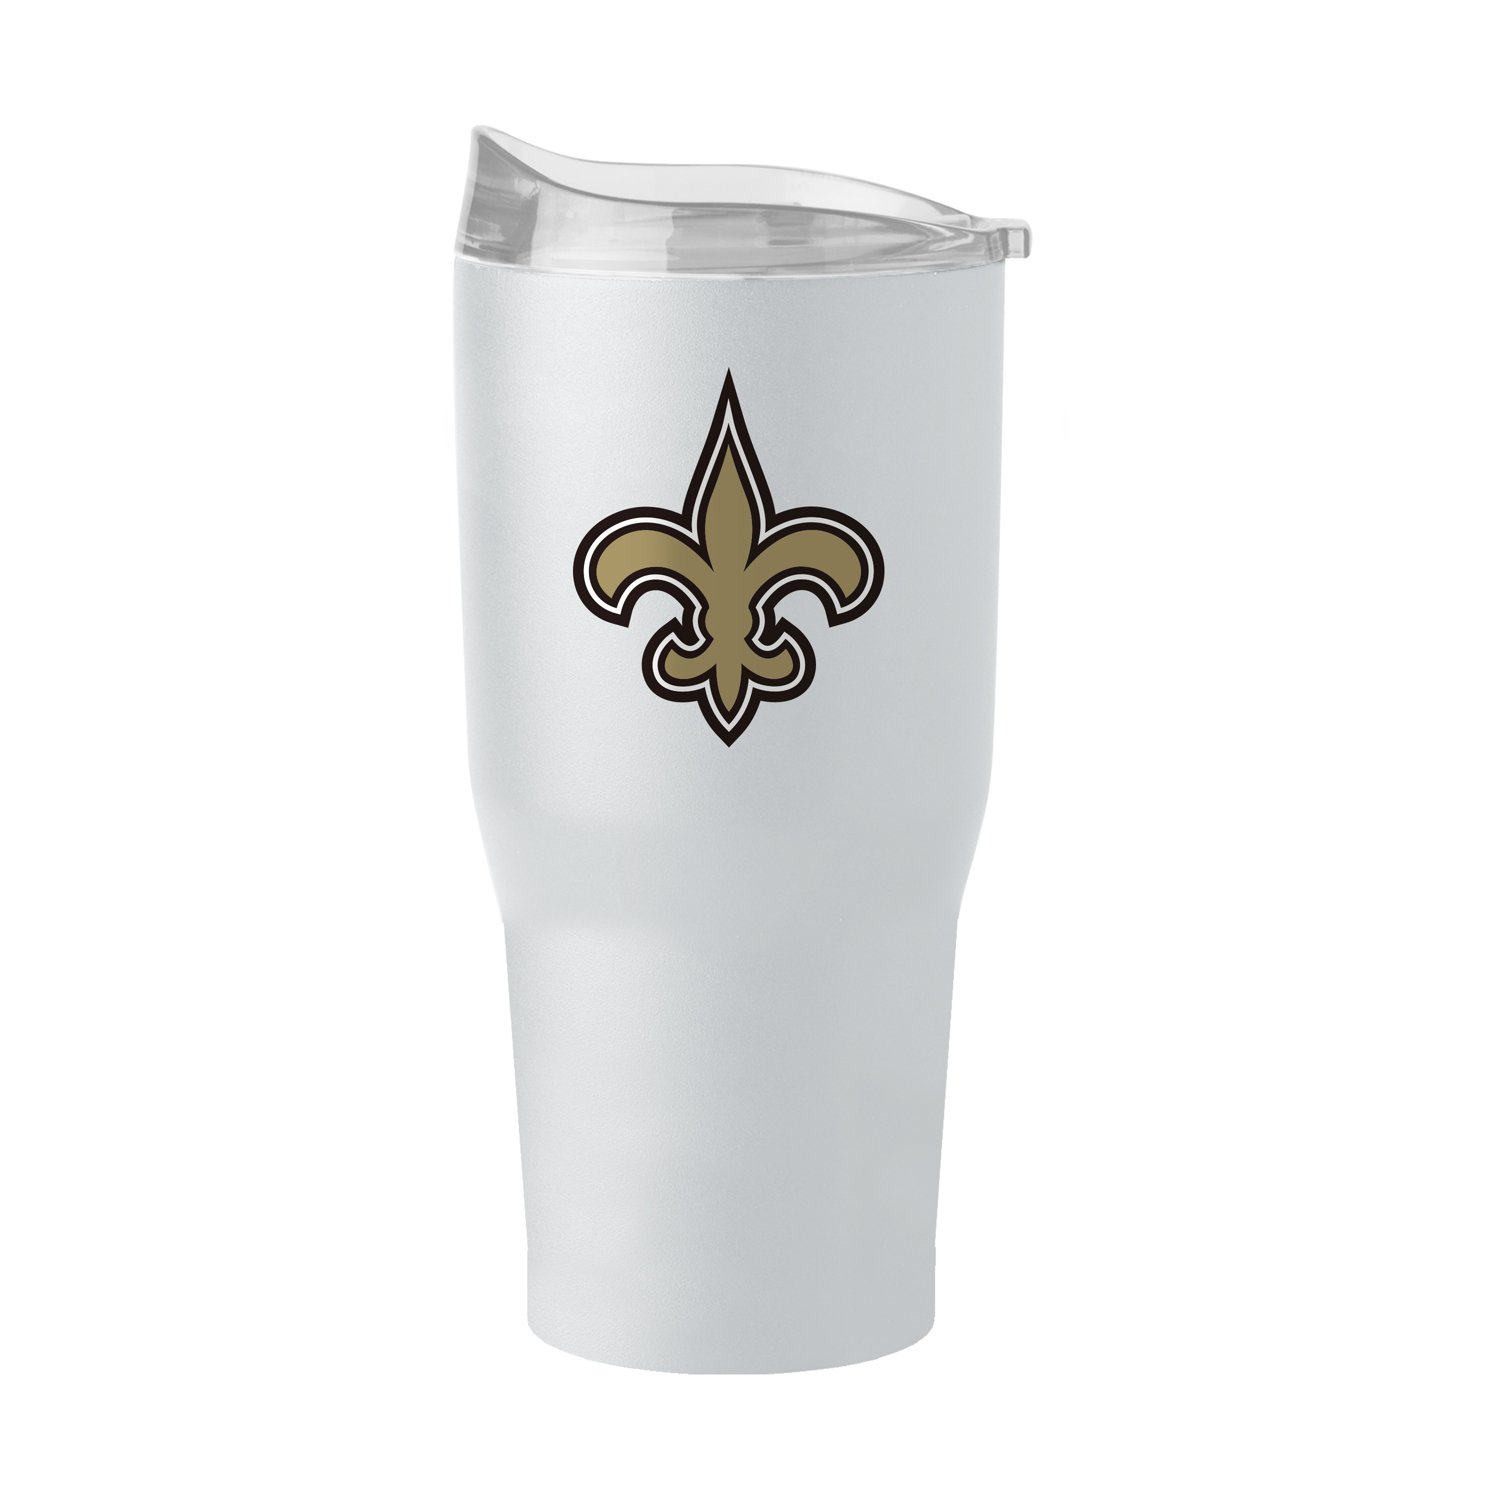 https://academy.scene7.com/is/image/academy//novelty/logo-brands-new-orleans-saints-30-oz-gameday-powder-coat-tumbler-620-s30pt-1a-white/c3b19bca4b904ad6857da370c92ed34a?$d-plp-product-image$